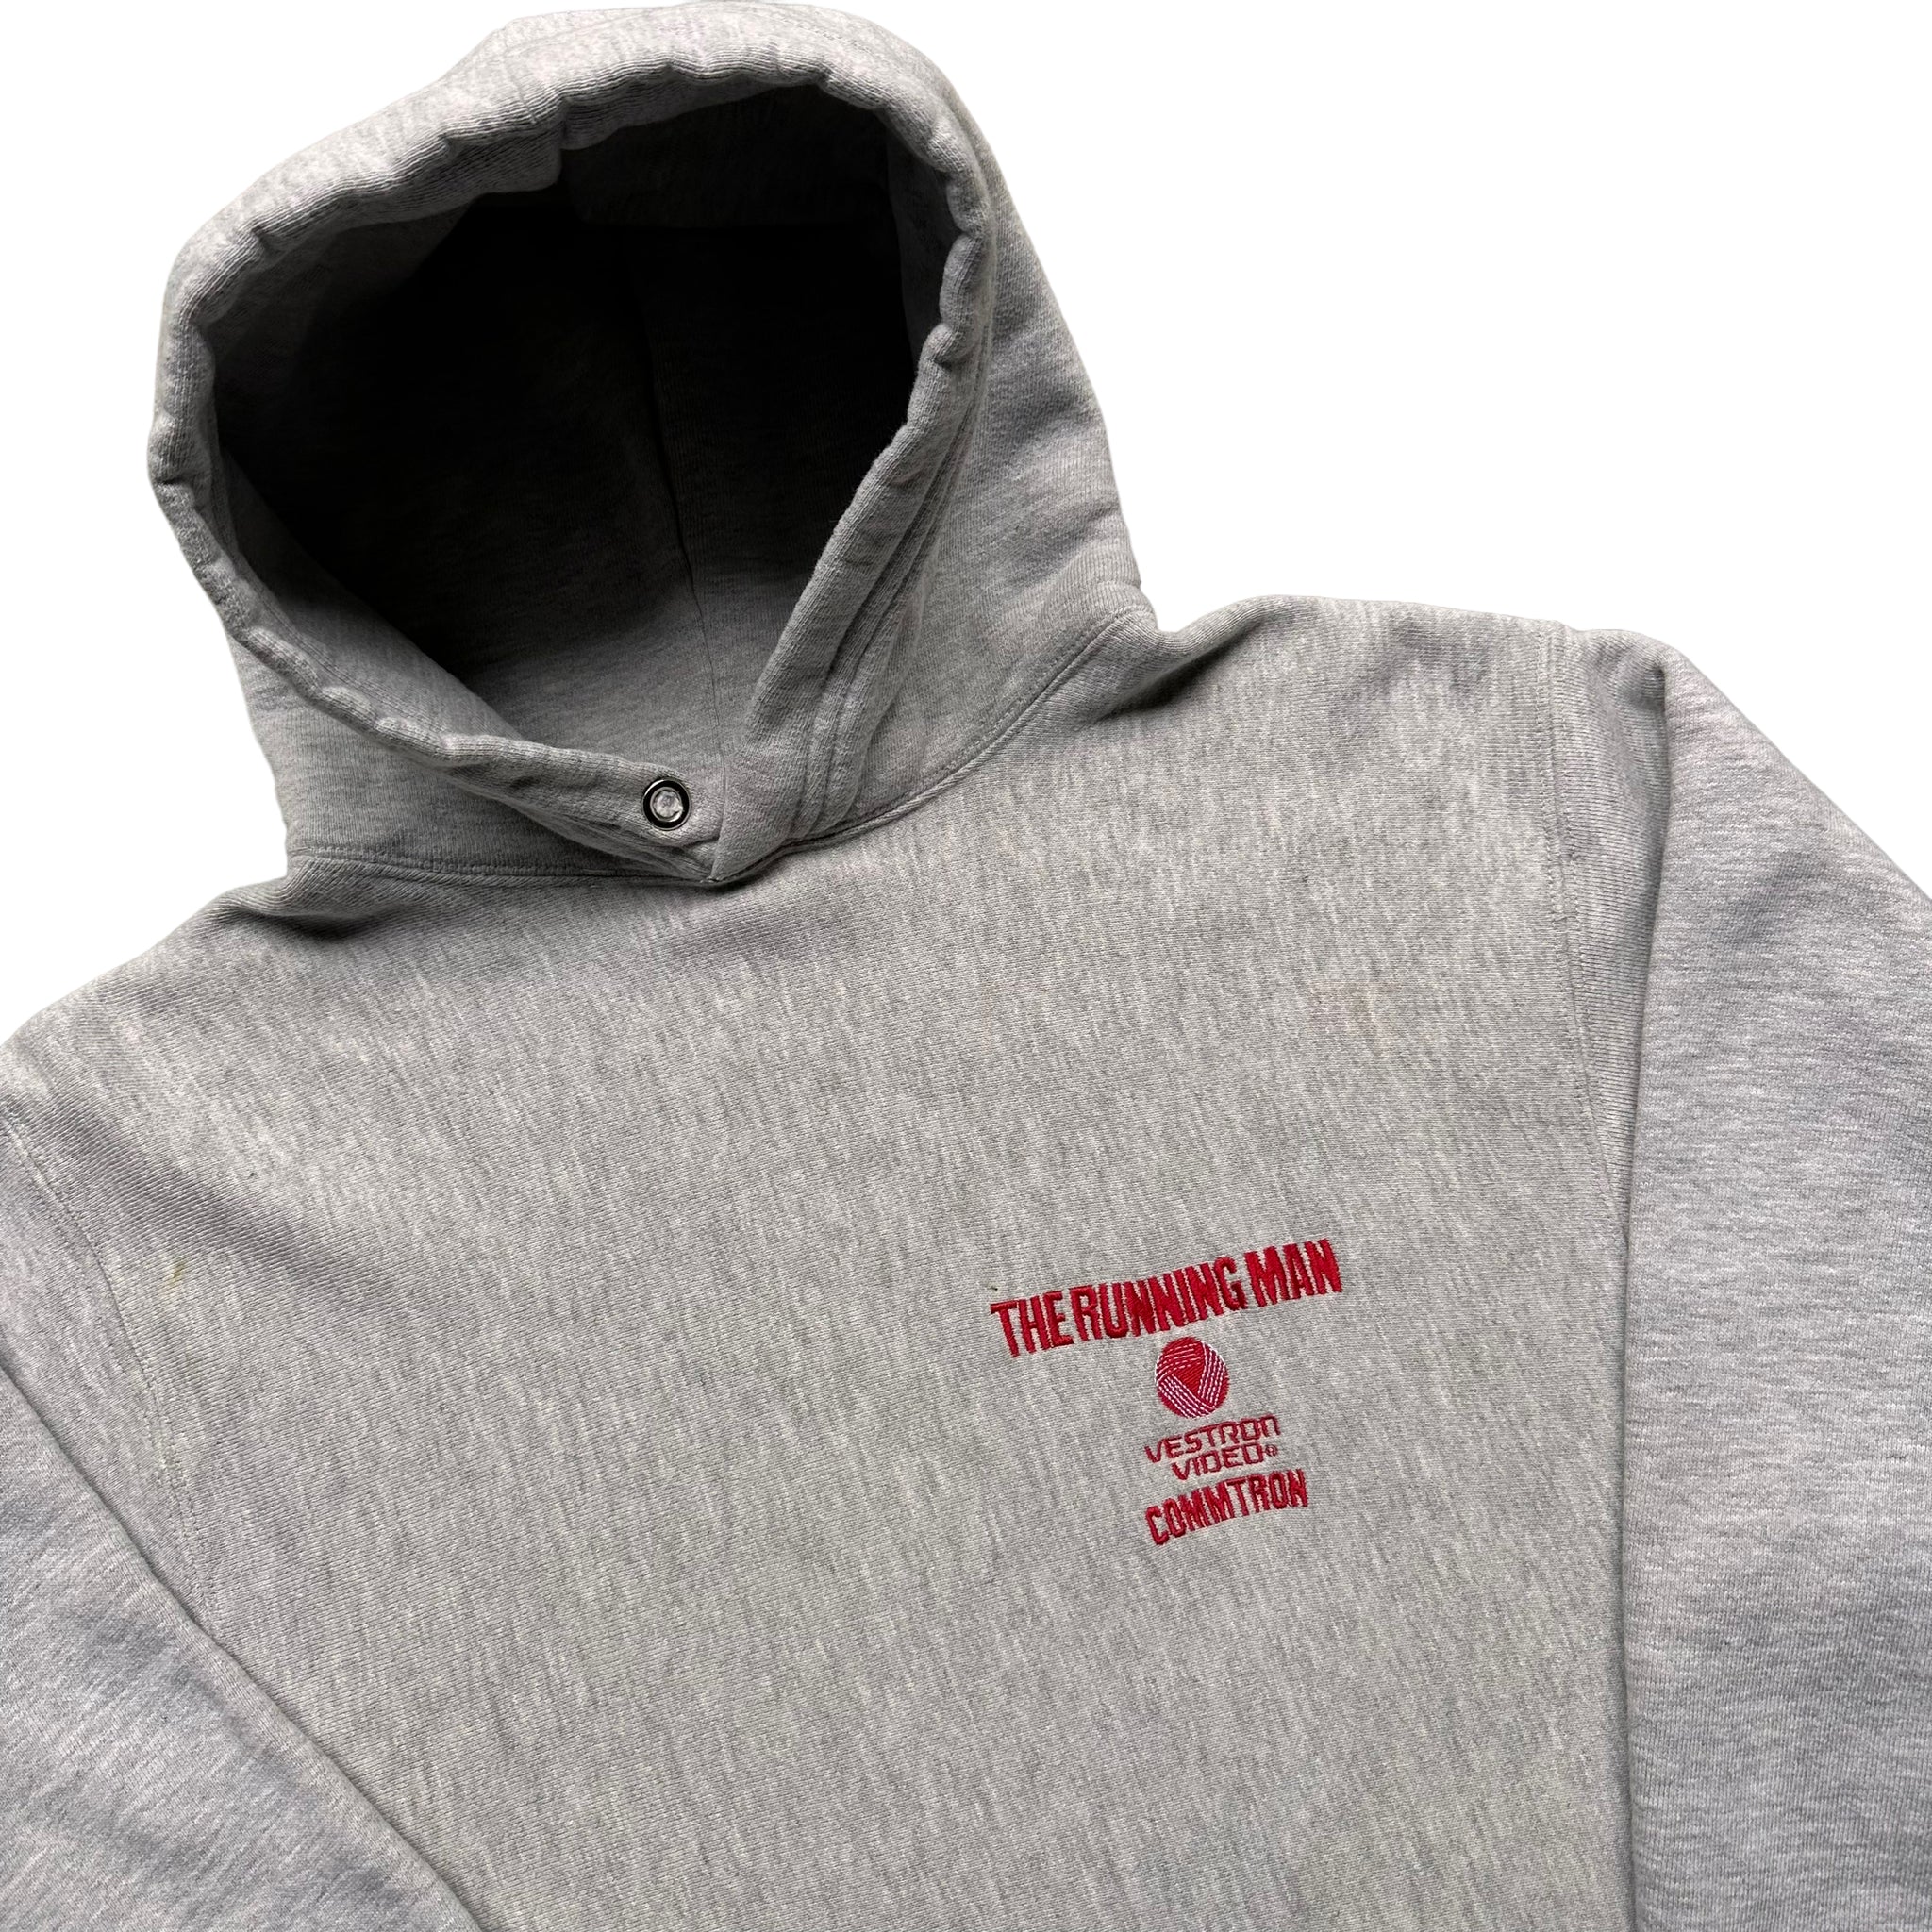 1987 The running man Reverse weave hooded M/L